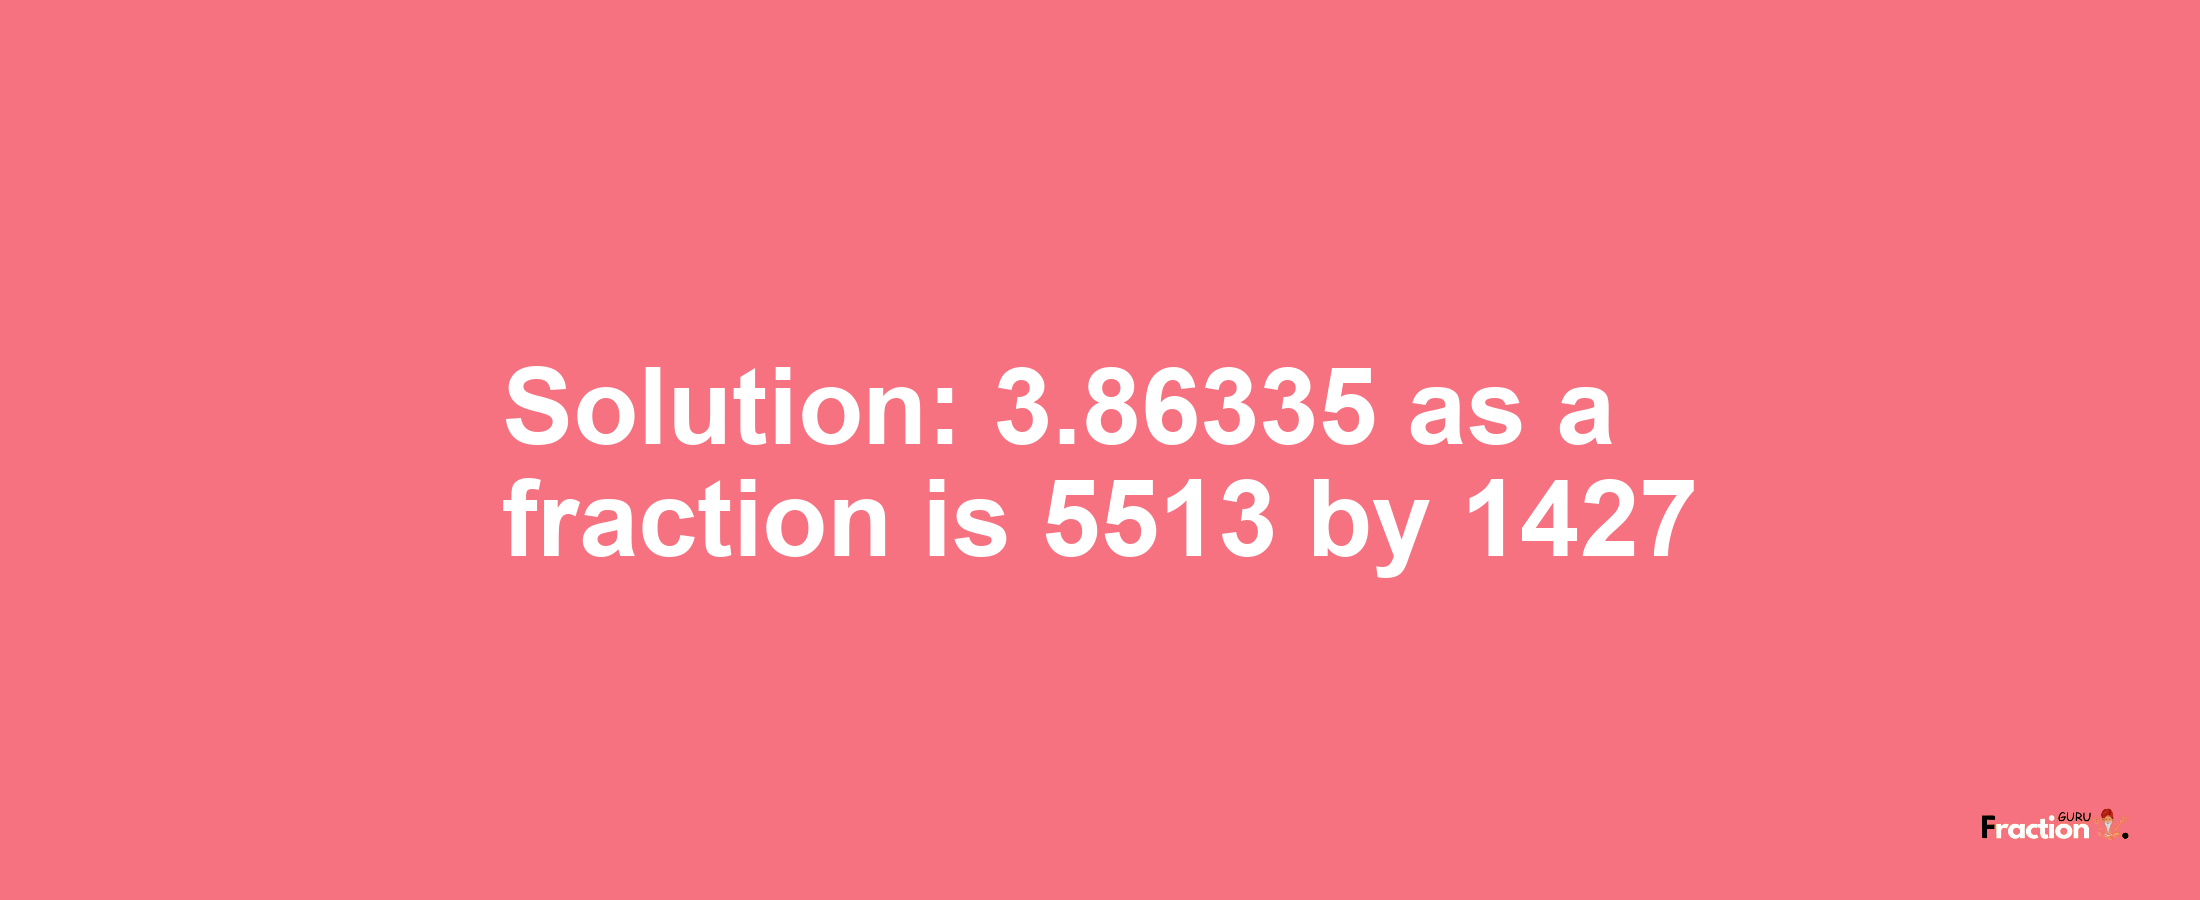 Solution:3.86335 as a fraction is 5513/1427